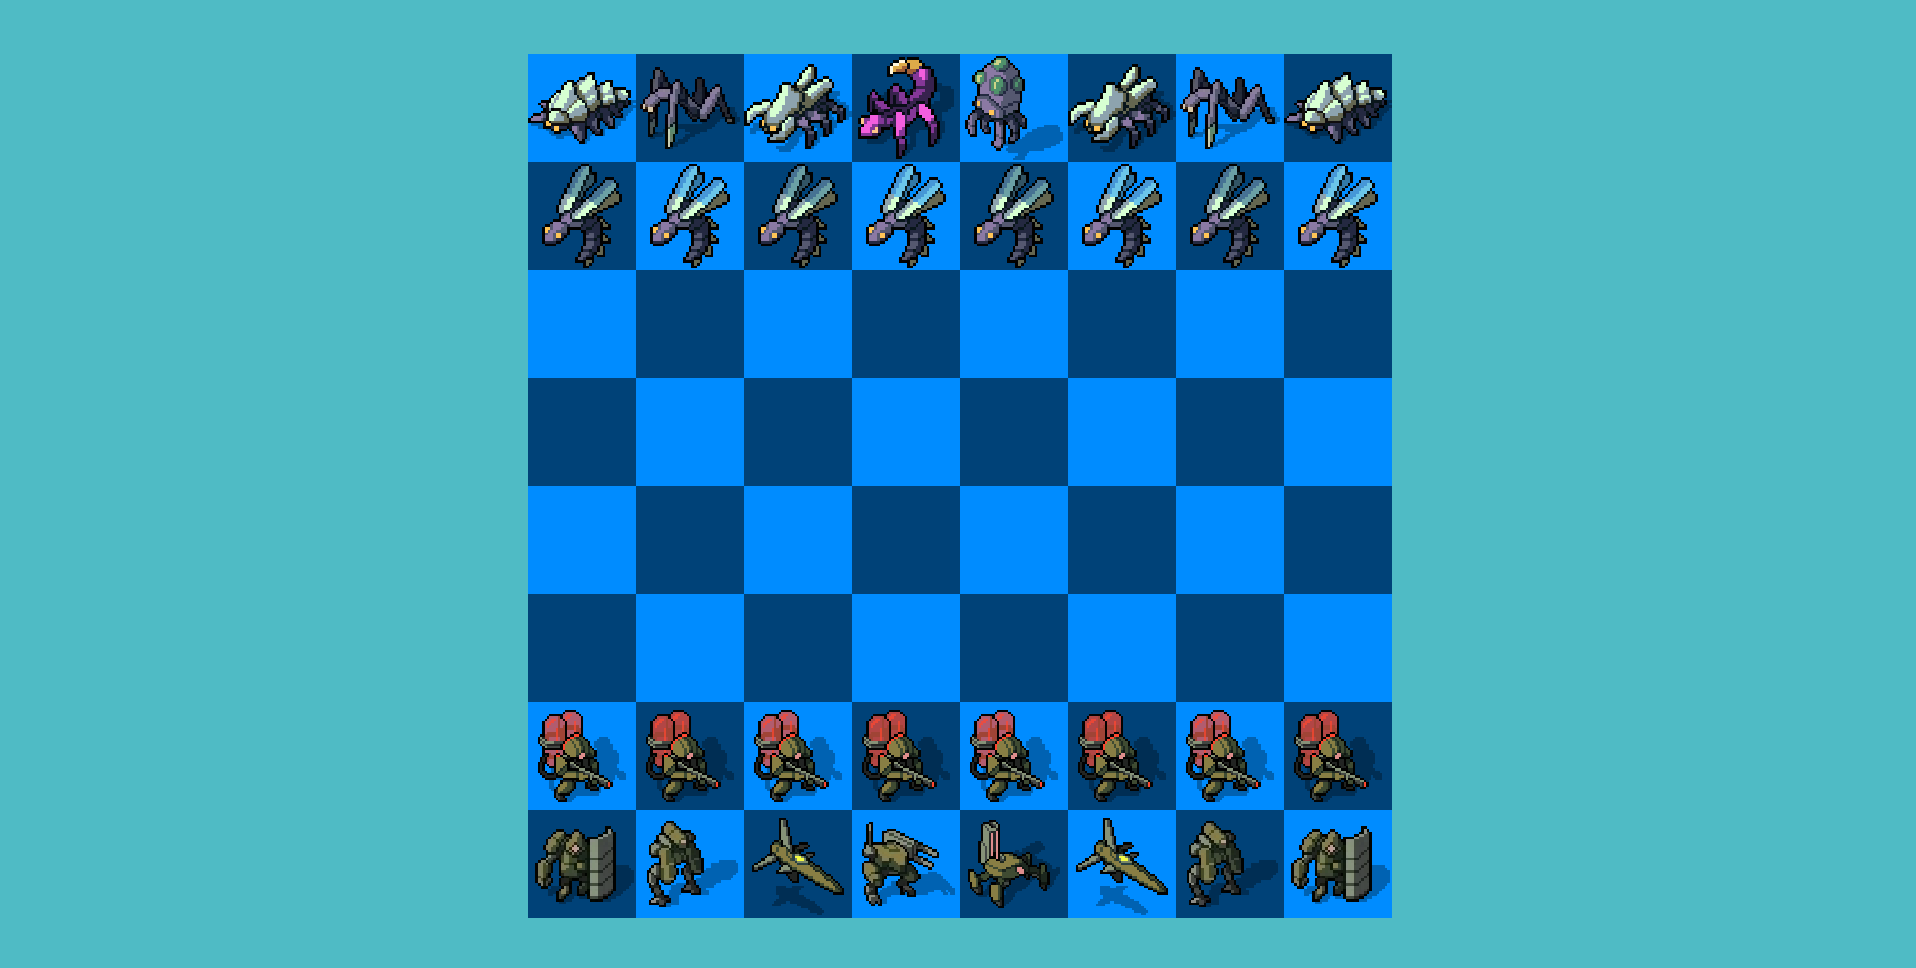 2 player chess with bugs and robots